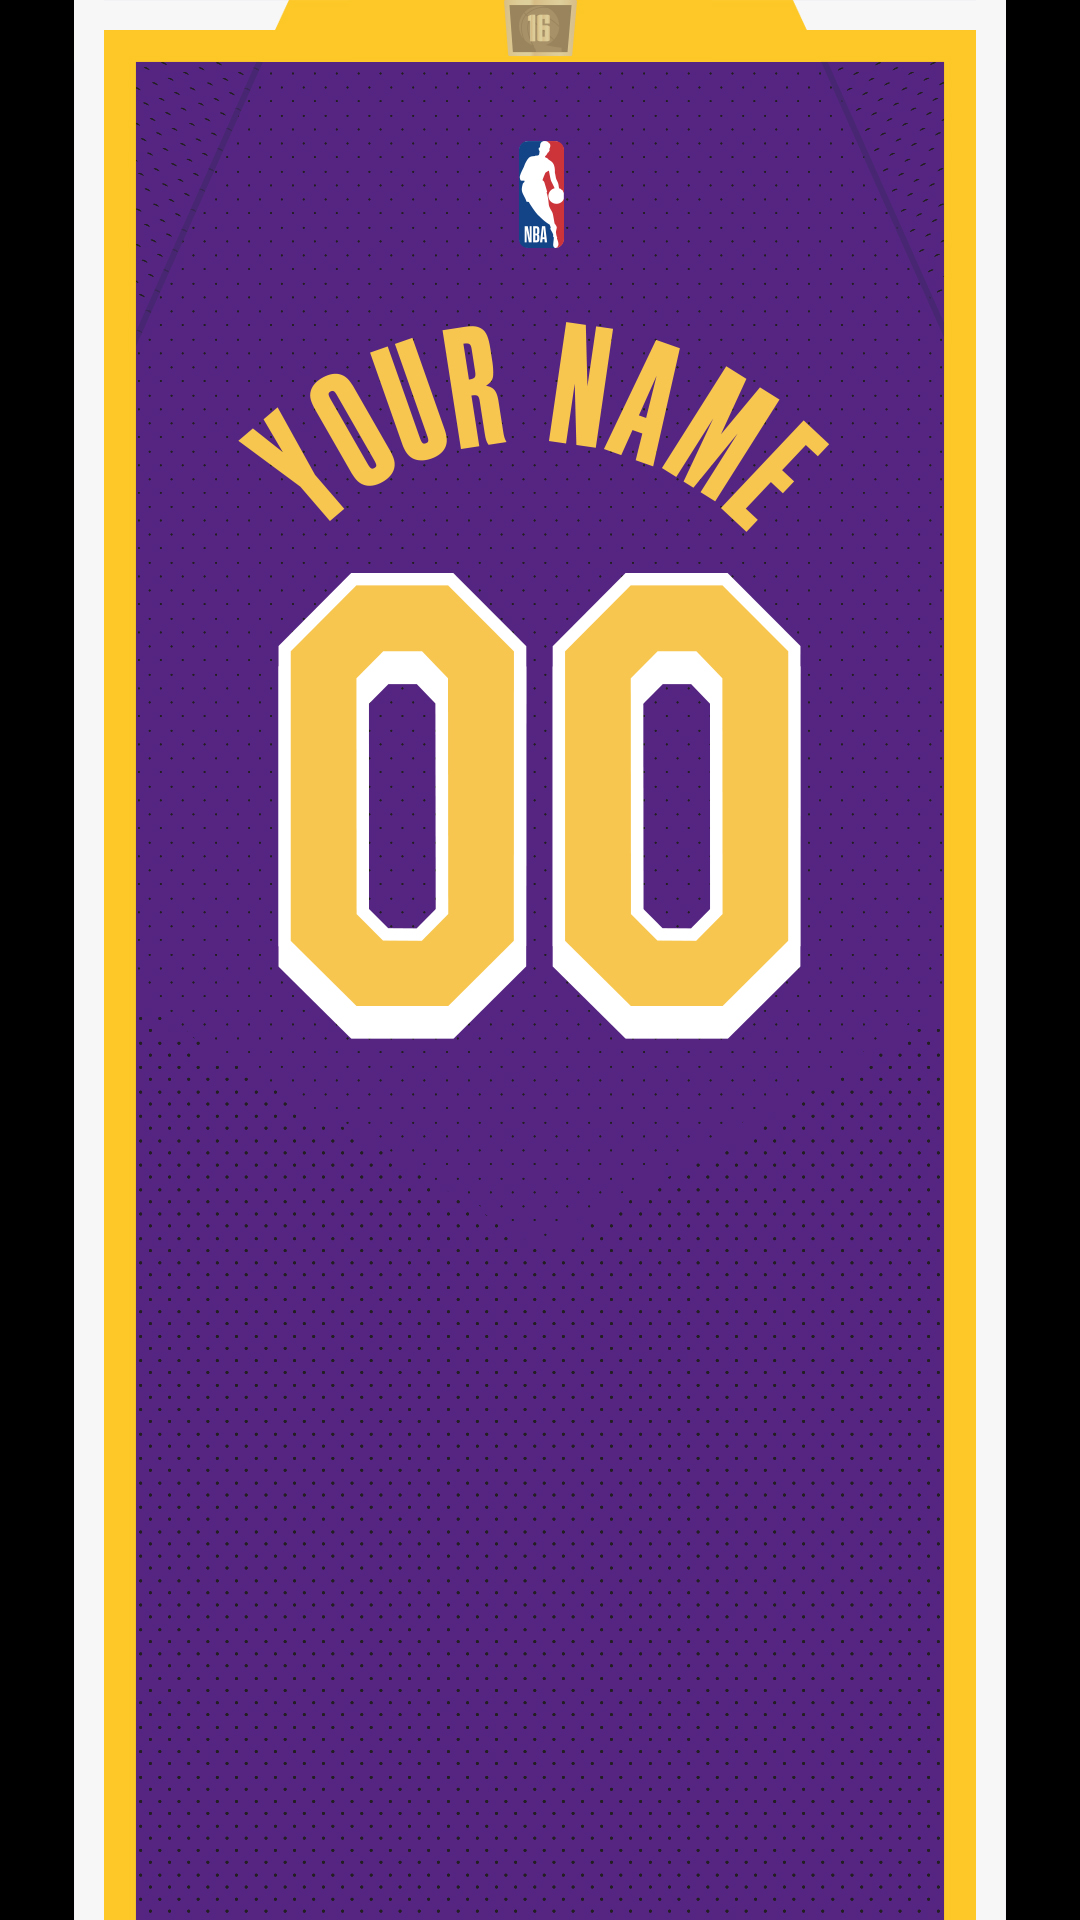 personalized lakers jersey